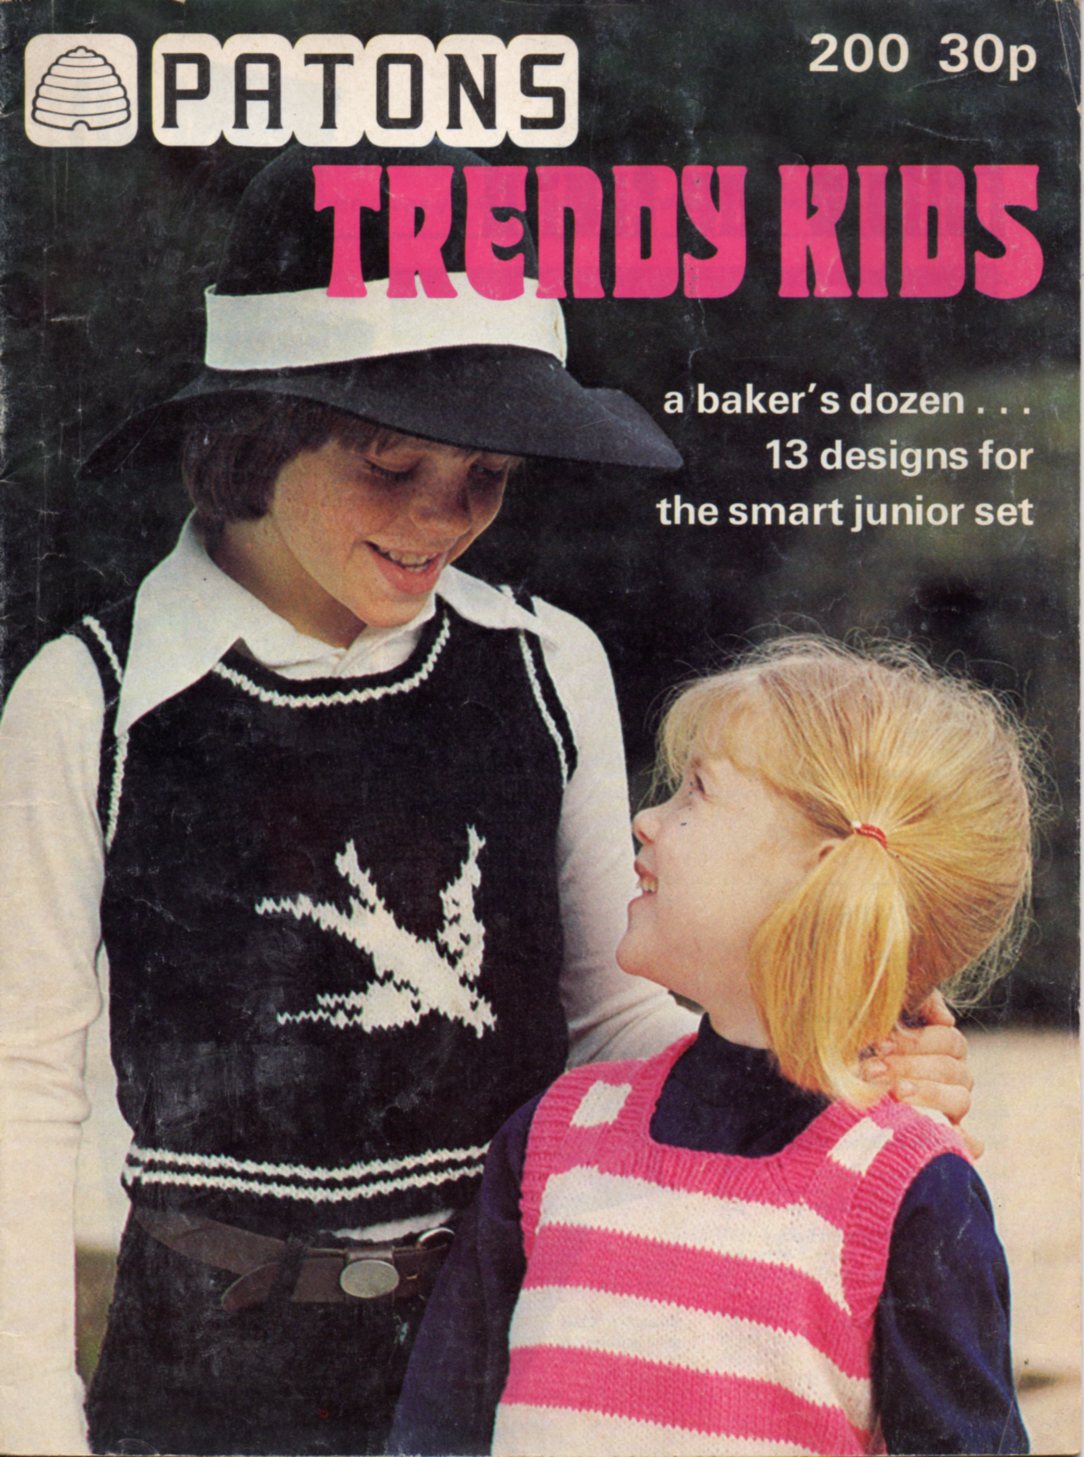 Cover of Patons 200 - Trendy Kids. Shows 2 girls, one searing a black and white tank top with a white bird motif, and the other a pink and white striped tank top.